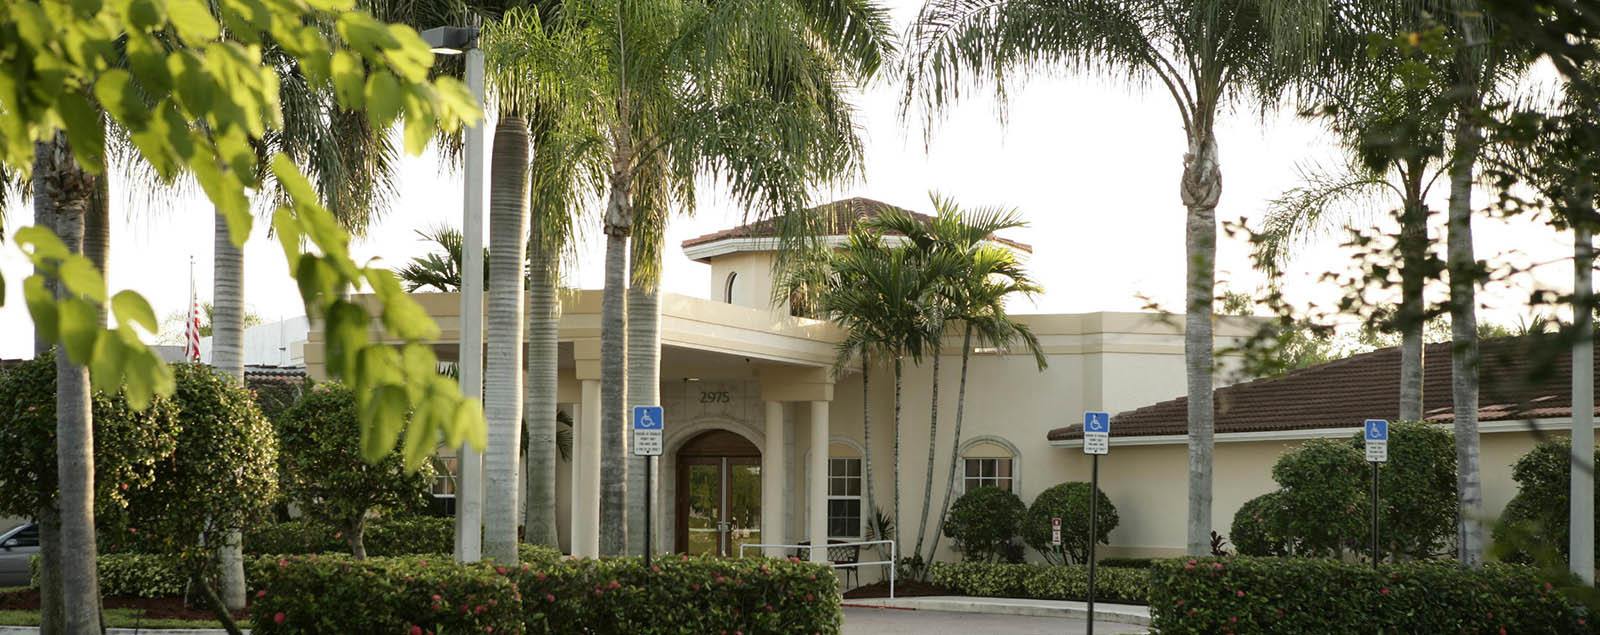 Levels of Senior Living care at senior living in Coral Springs